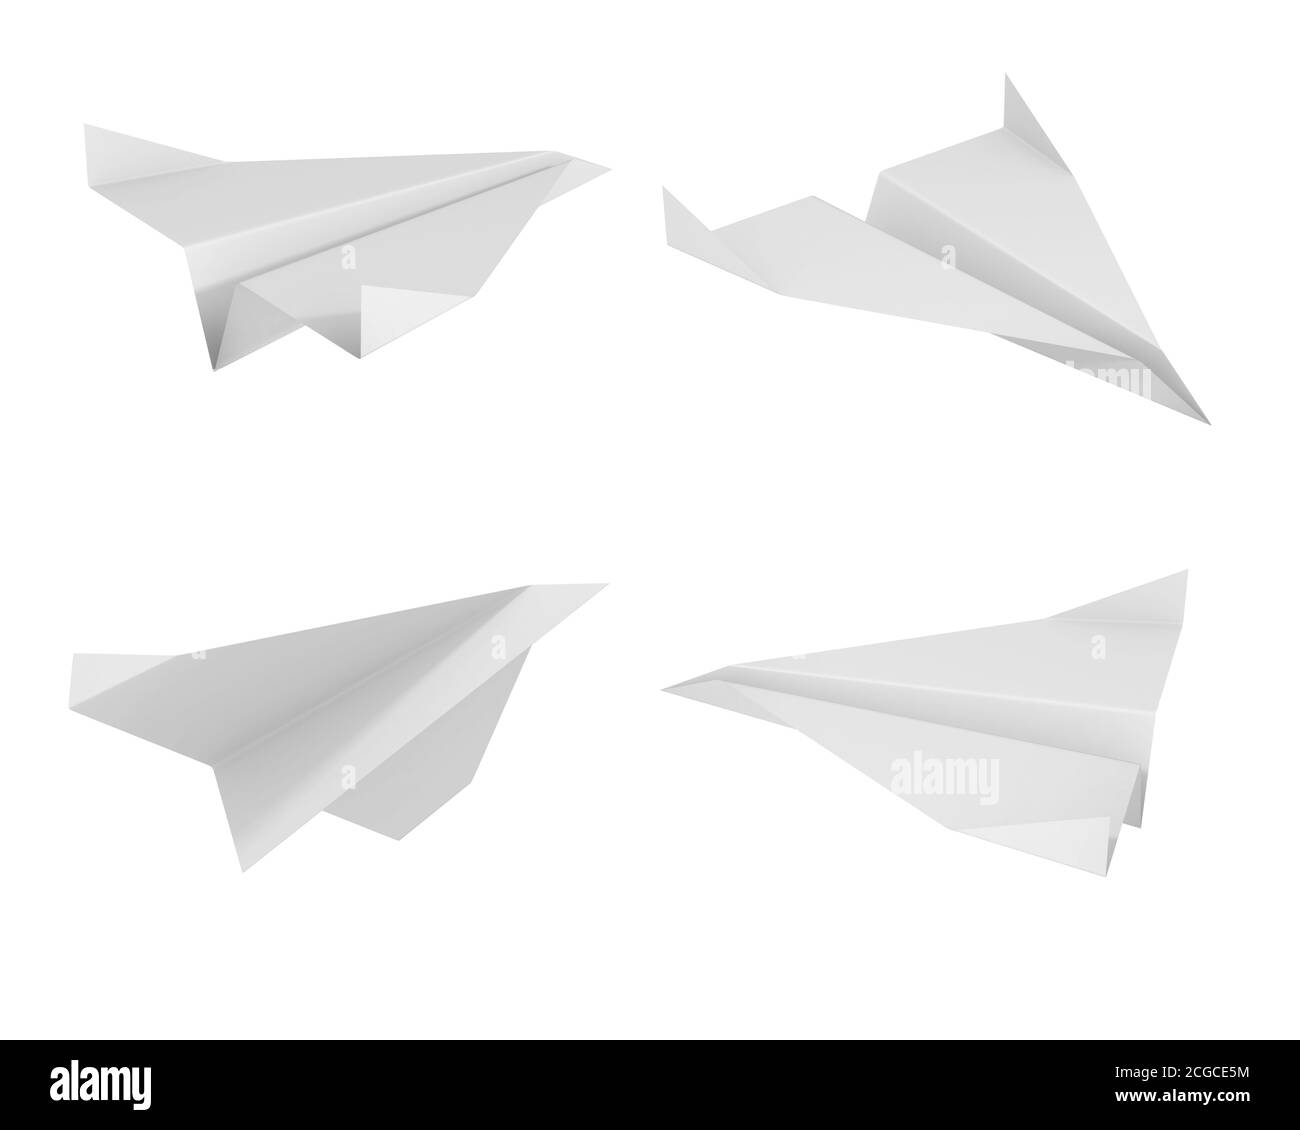 paper plane from different views Stock Photo